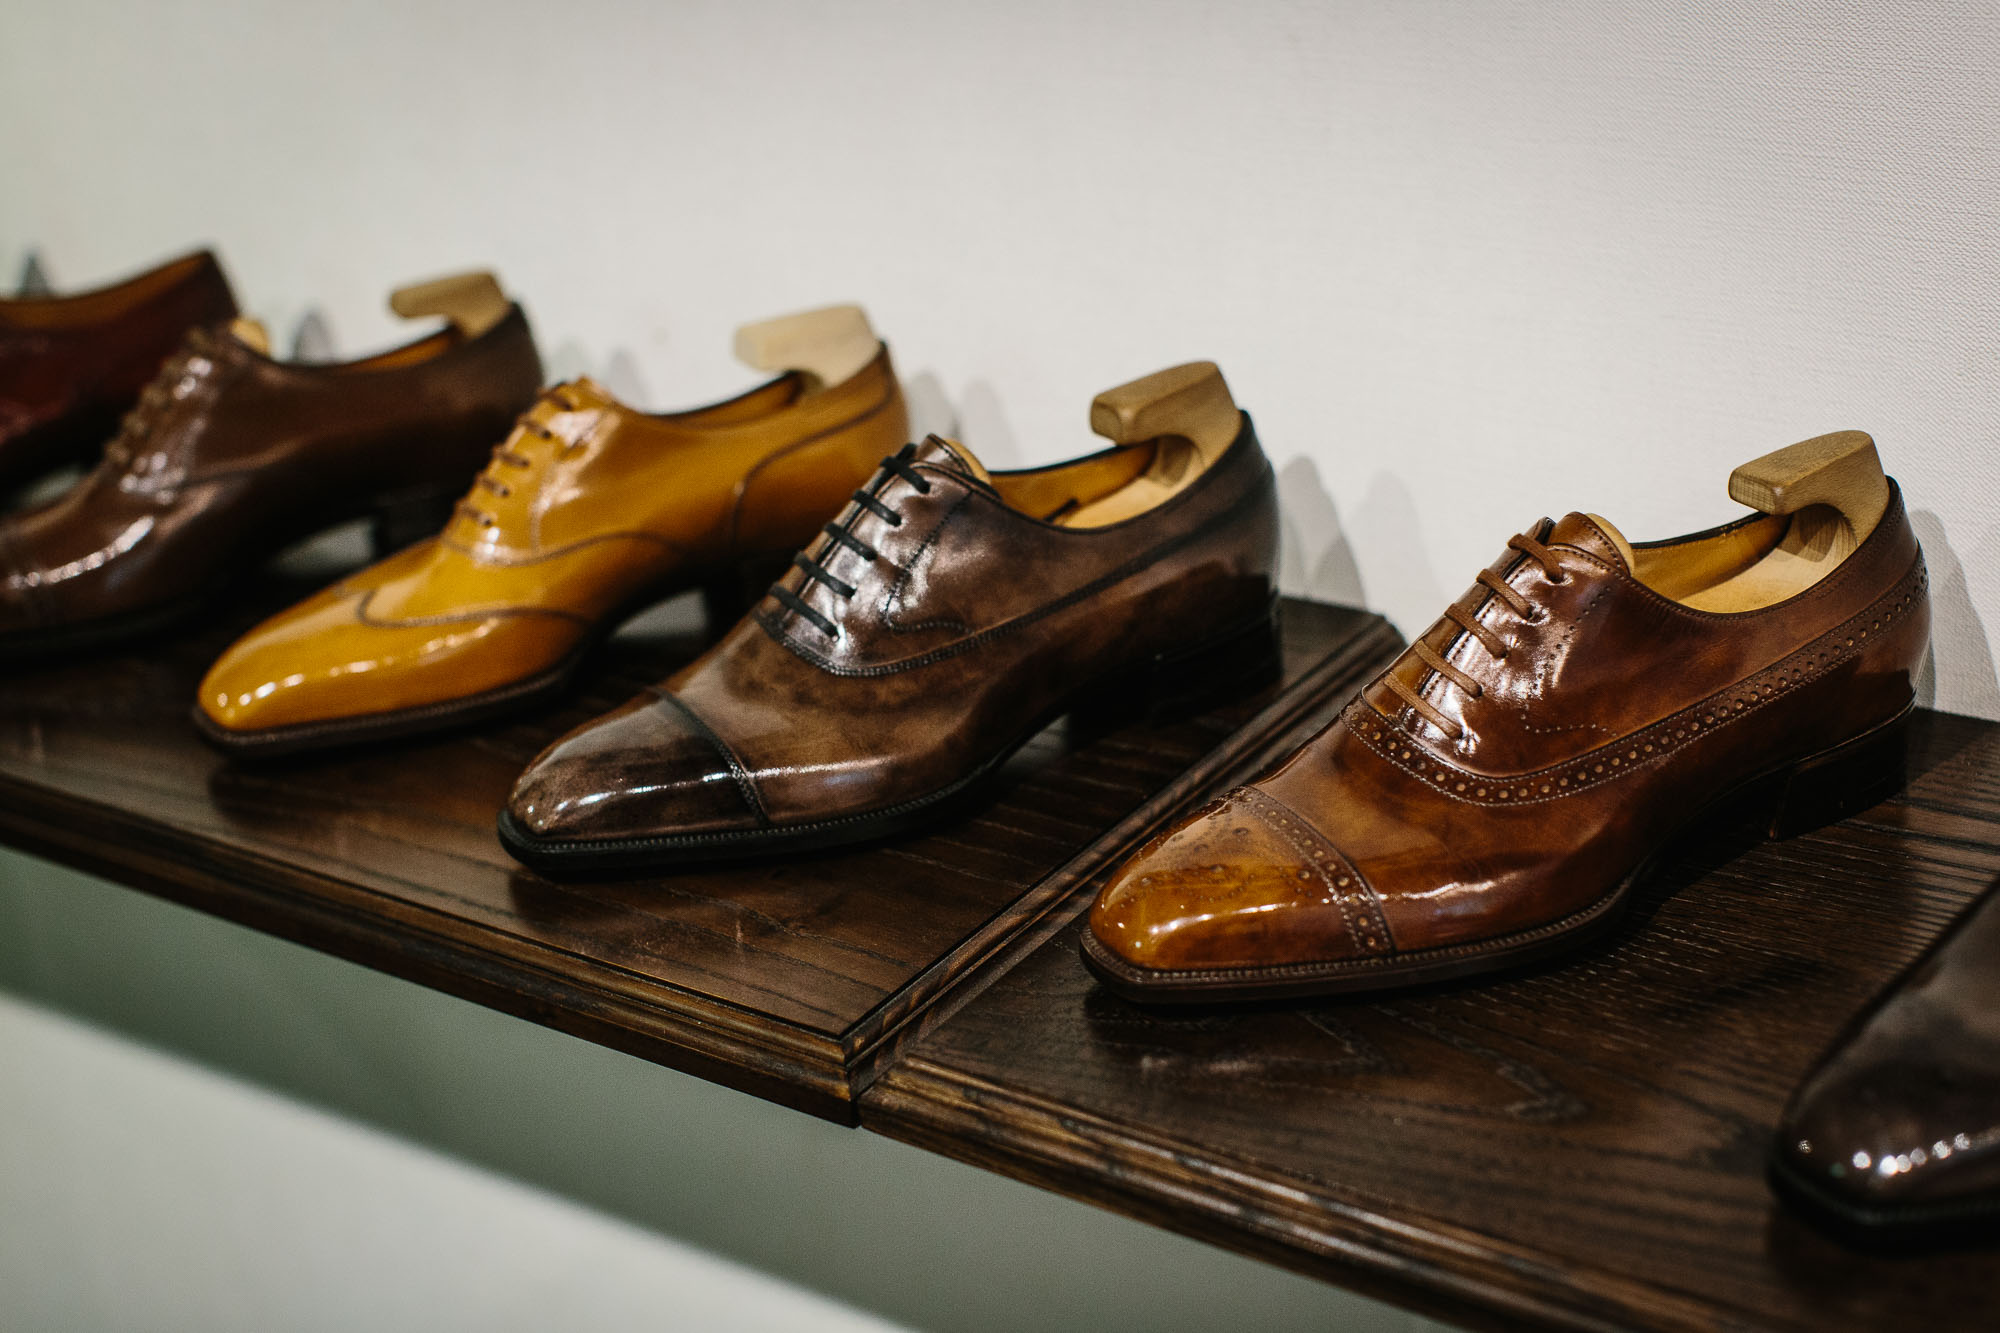 bespoke shoes cost